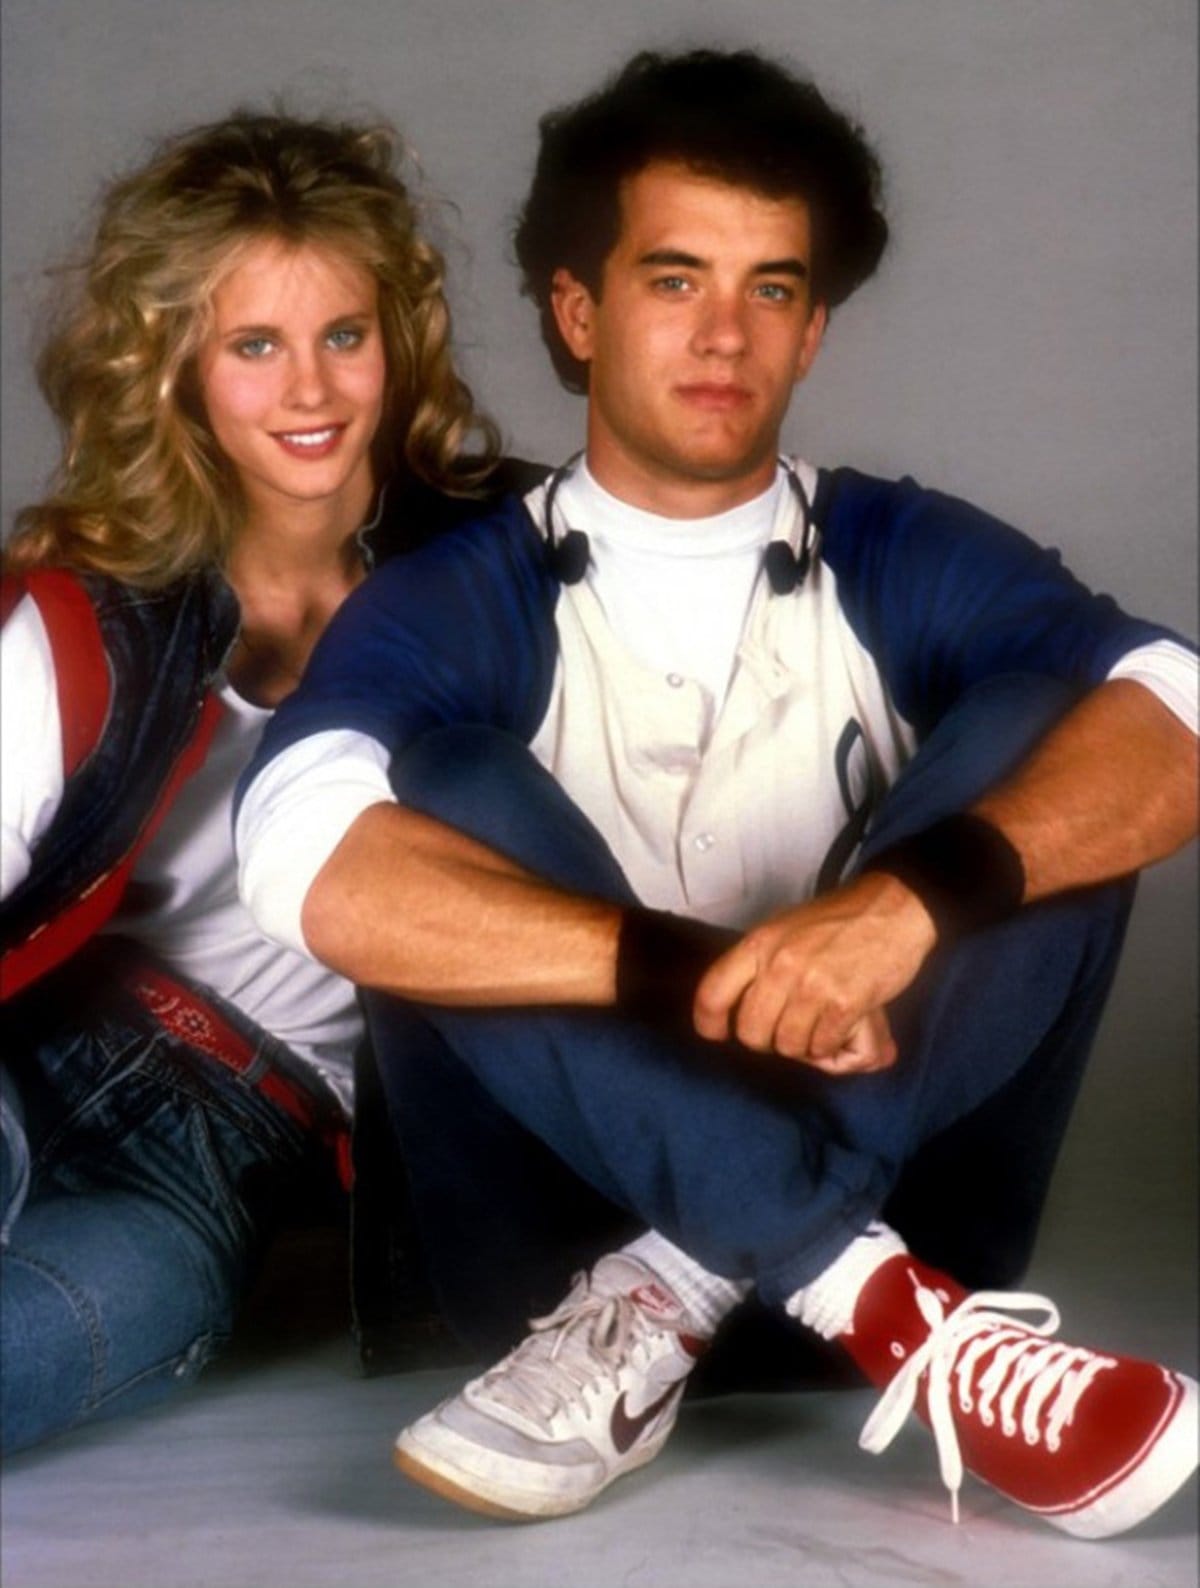 Tom Hanks as Richard Drew and Lori Singer as Maddy in the 1985 American comedy film The Man with One Red Shoe